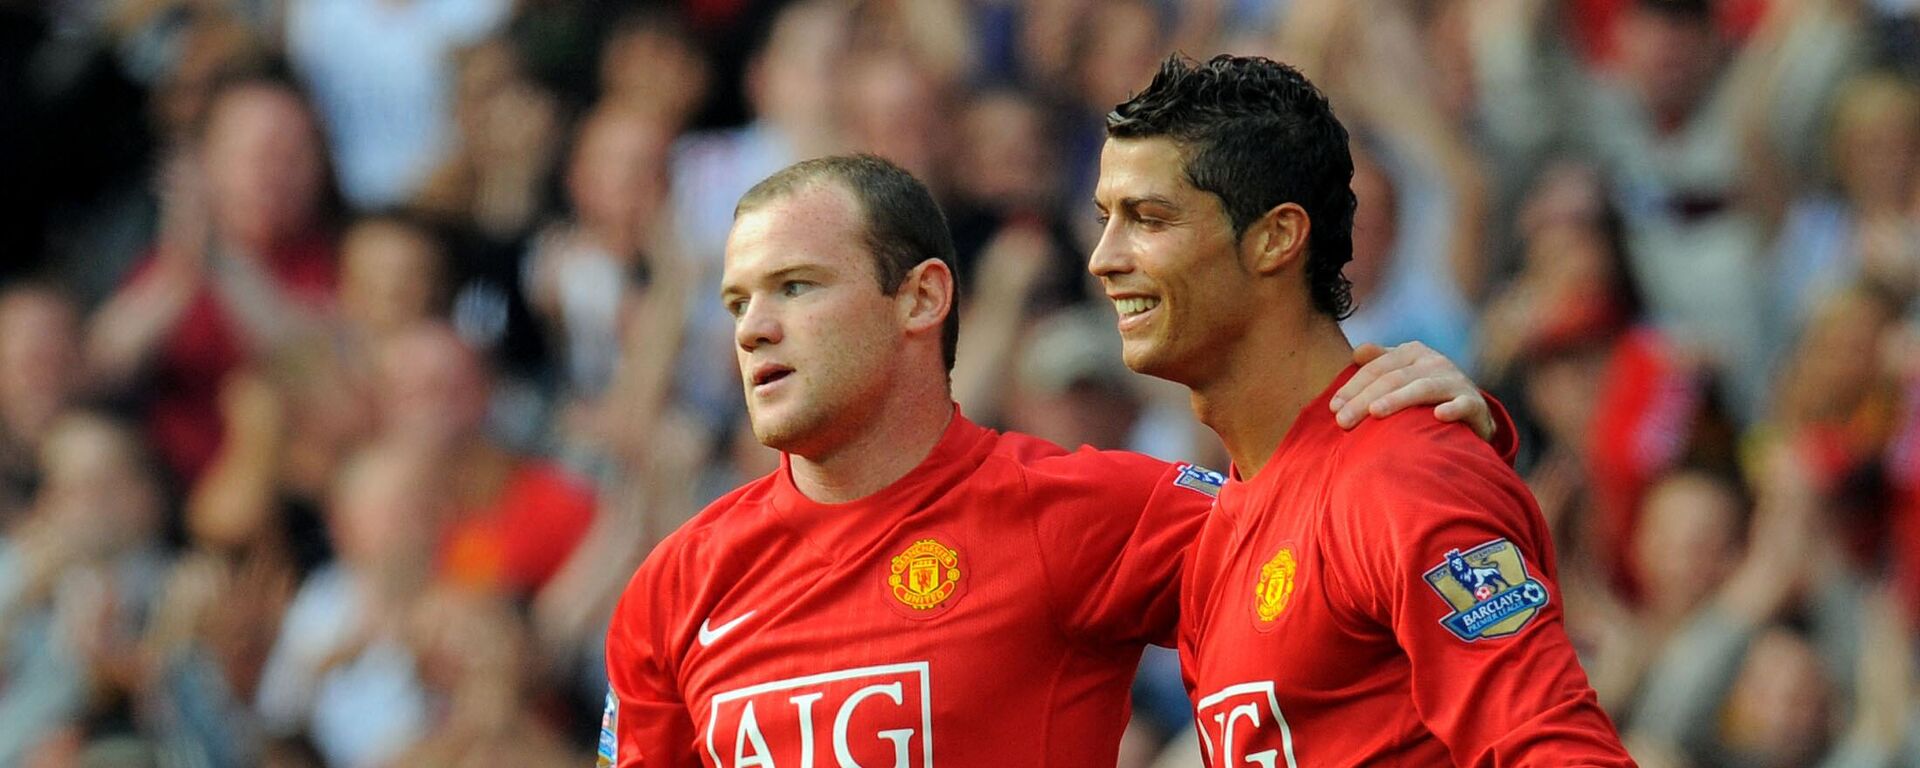 FILE PHOTO: Manchester United's English forward Wayne Rooney (L) celebrates after scoring with Manchester United's Portugese midfielder Cristiano Ronaldo during the English Premier league football match against Bolton Wanderers at Old Trafford, Manchester, northwest England, on September 27 2008.  - Sputnik International, 1920, 08.04.2022